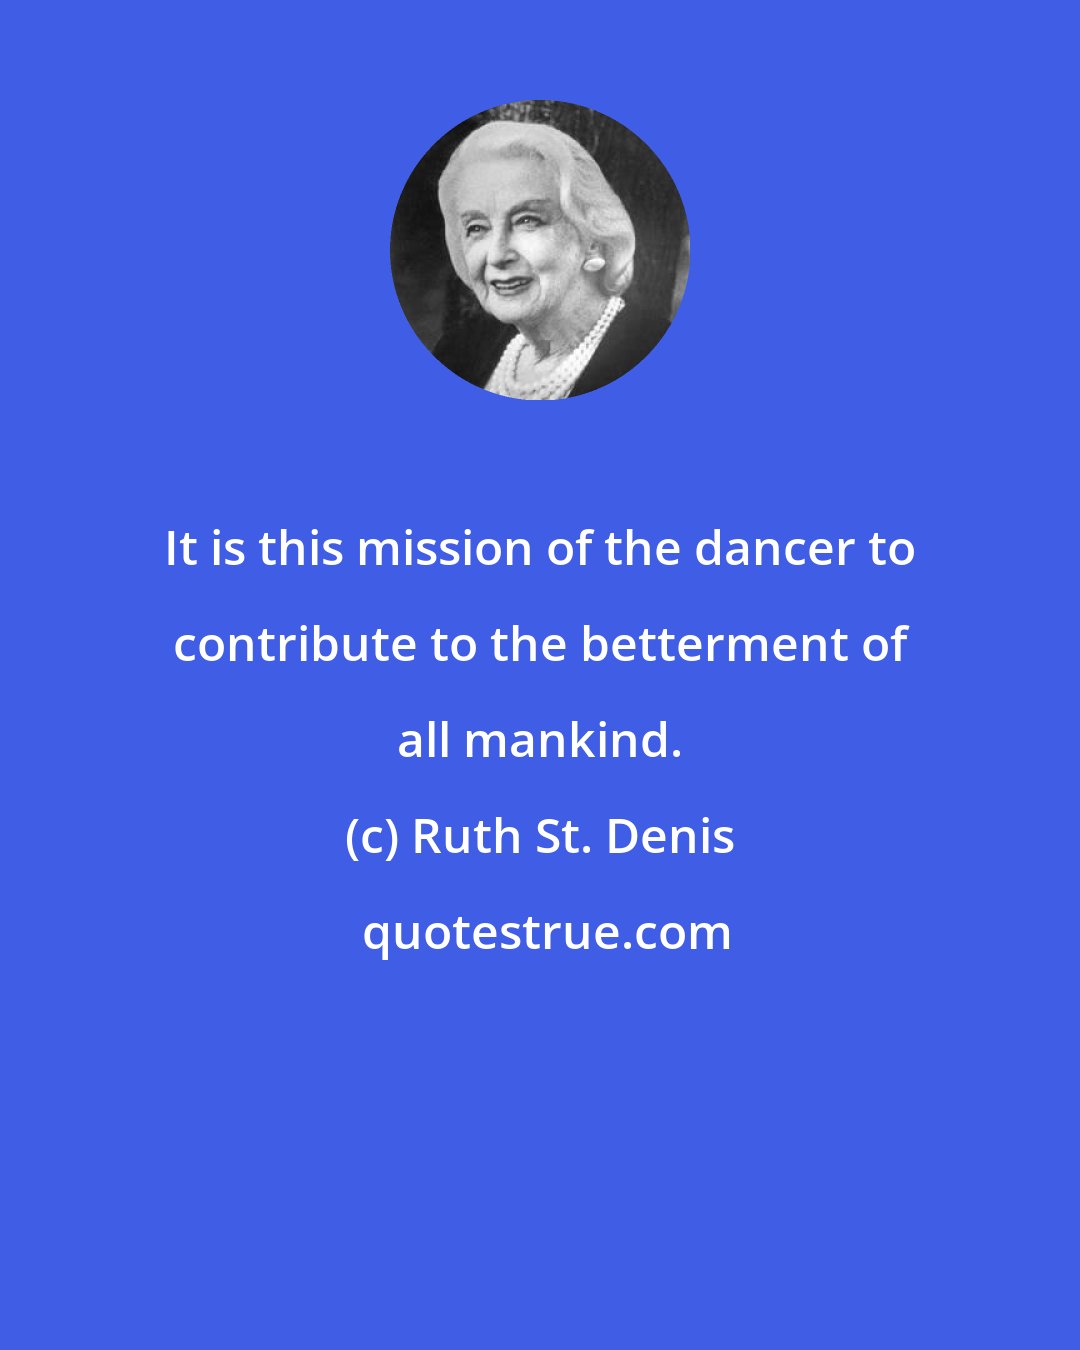 Ruth St. Denis: It is this mission of the dancer to contribute to the betterment of all mankind.